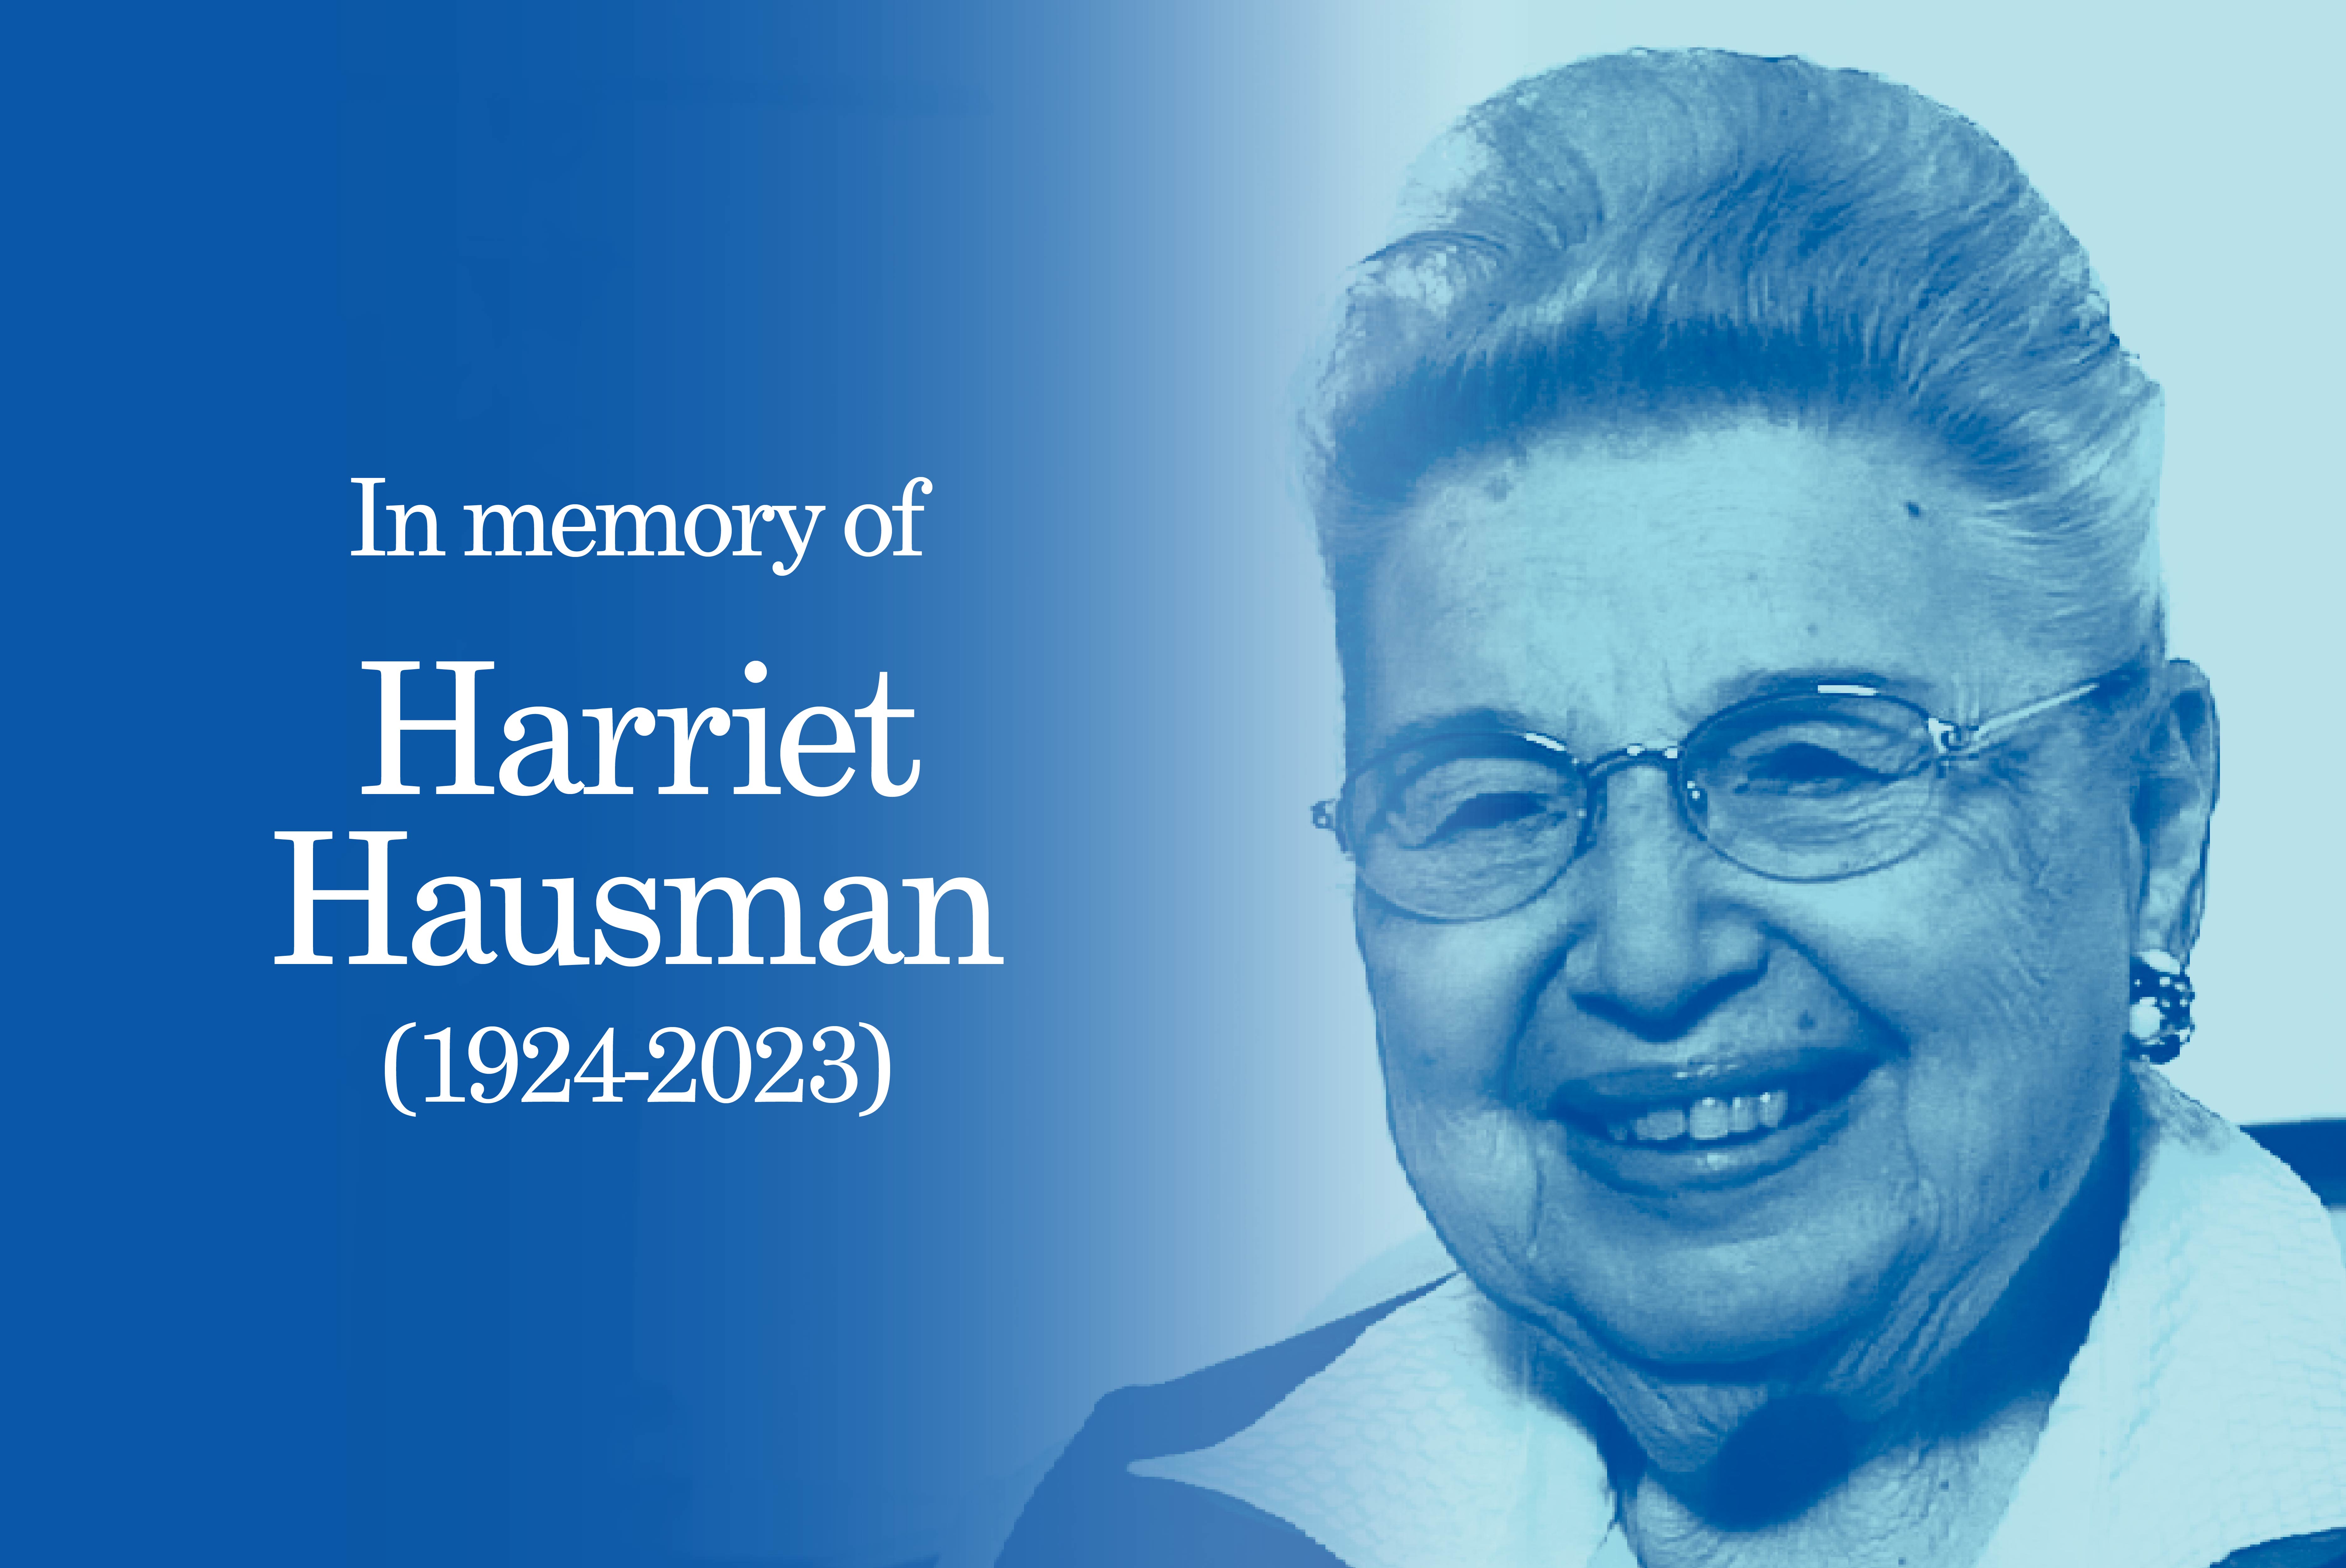 Blue filtered image of Harriet Hausman. White text "In memory of Harriet Hausman (1924-2023)"